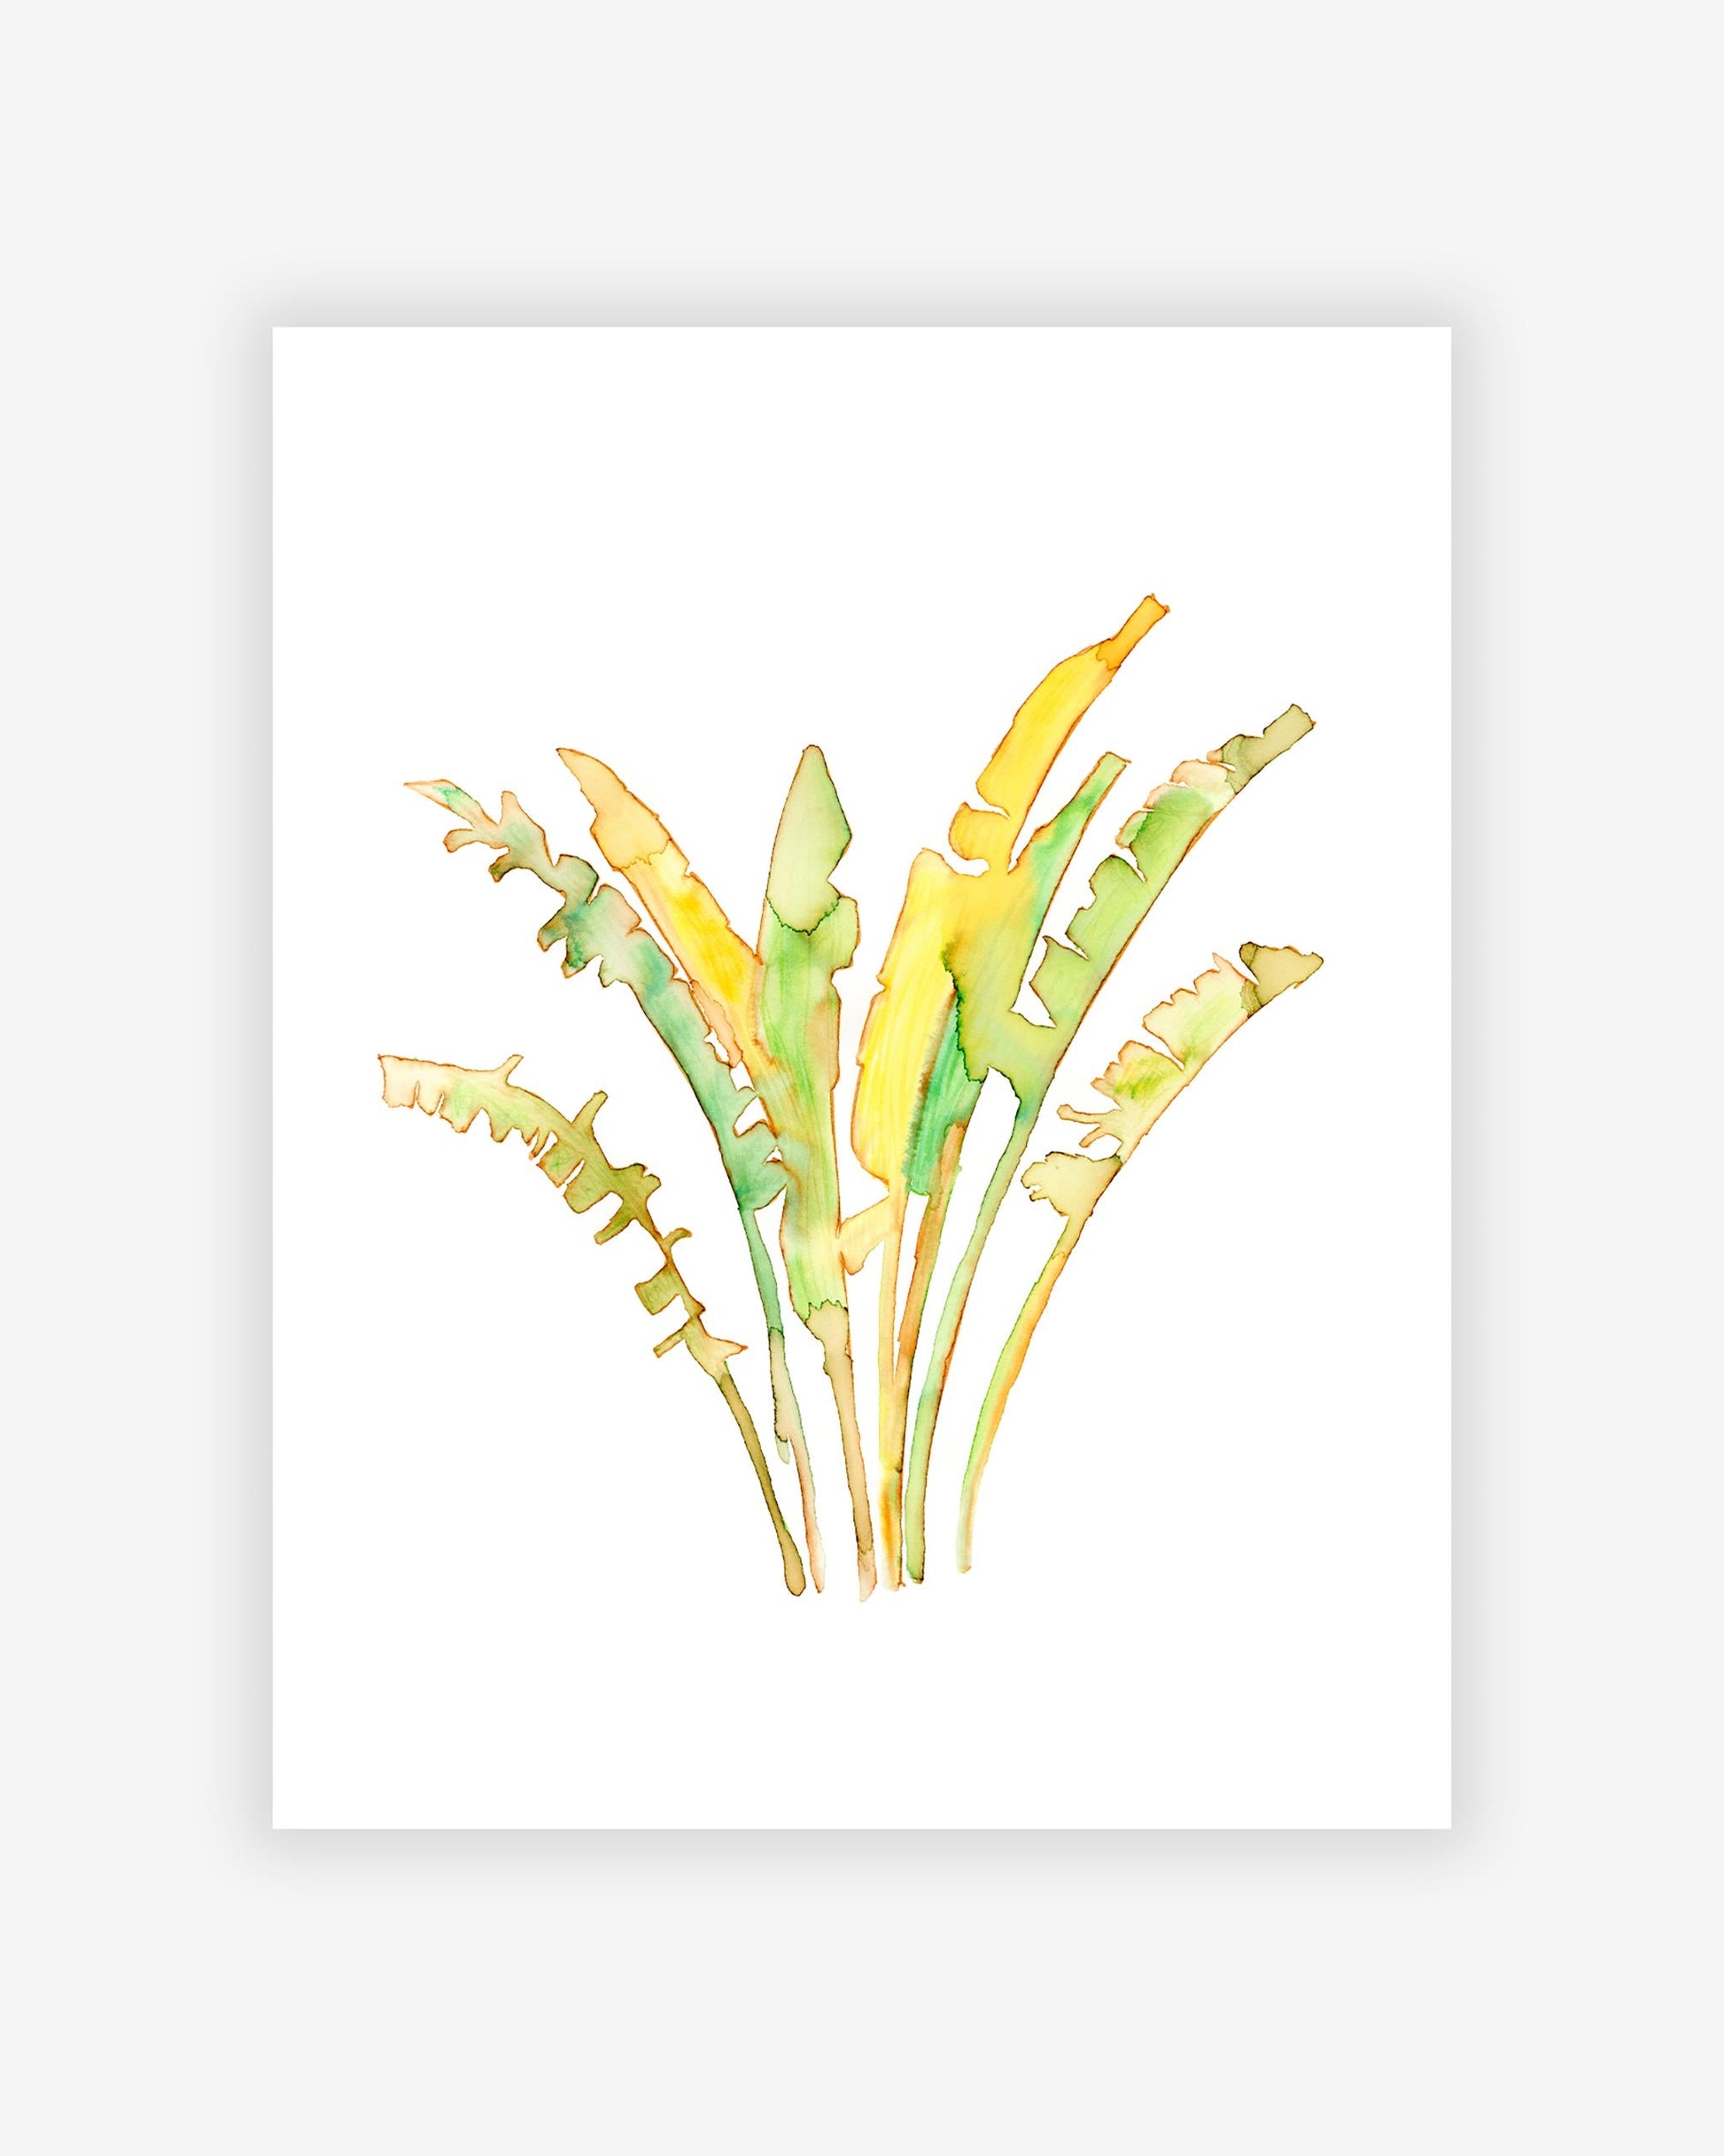 A Ravenala Print by the Artist of a banana plant on a white background